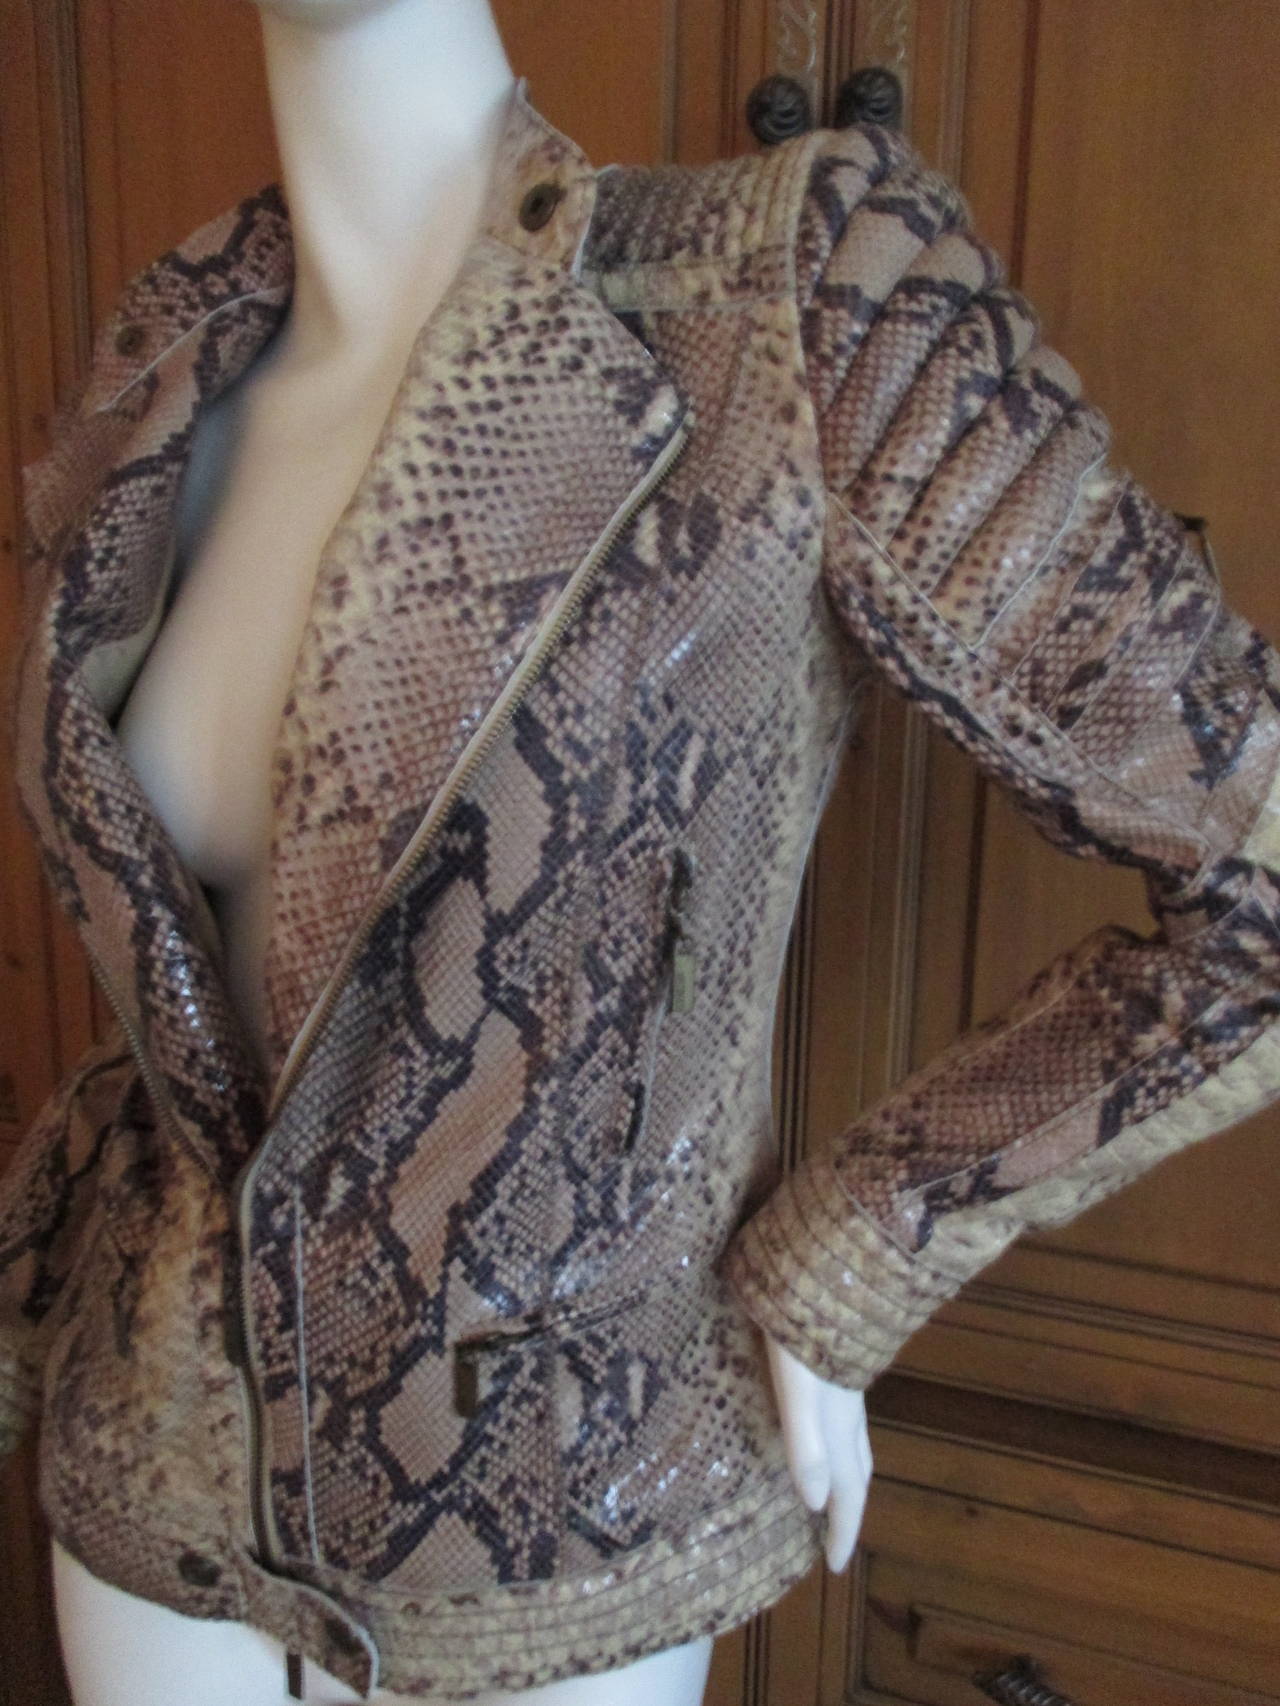 Roberto Cavalli Rocking Python Moto Jacket for Just Cavalli

This jacket has it going on in so many ways. Please check out the futuristic details with the zoom feature.

I'm not certain if it is genuine python or python treated leather .

It